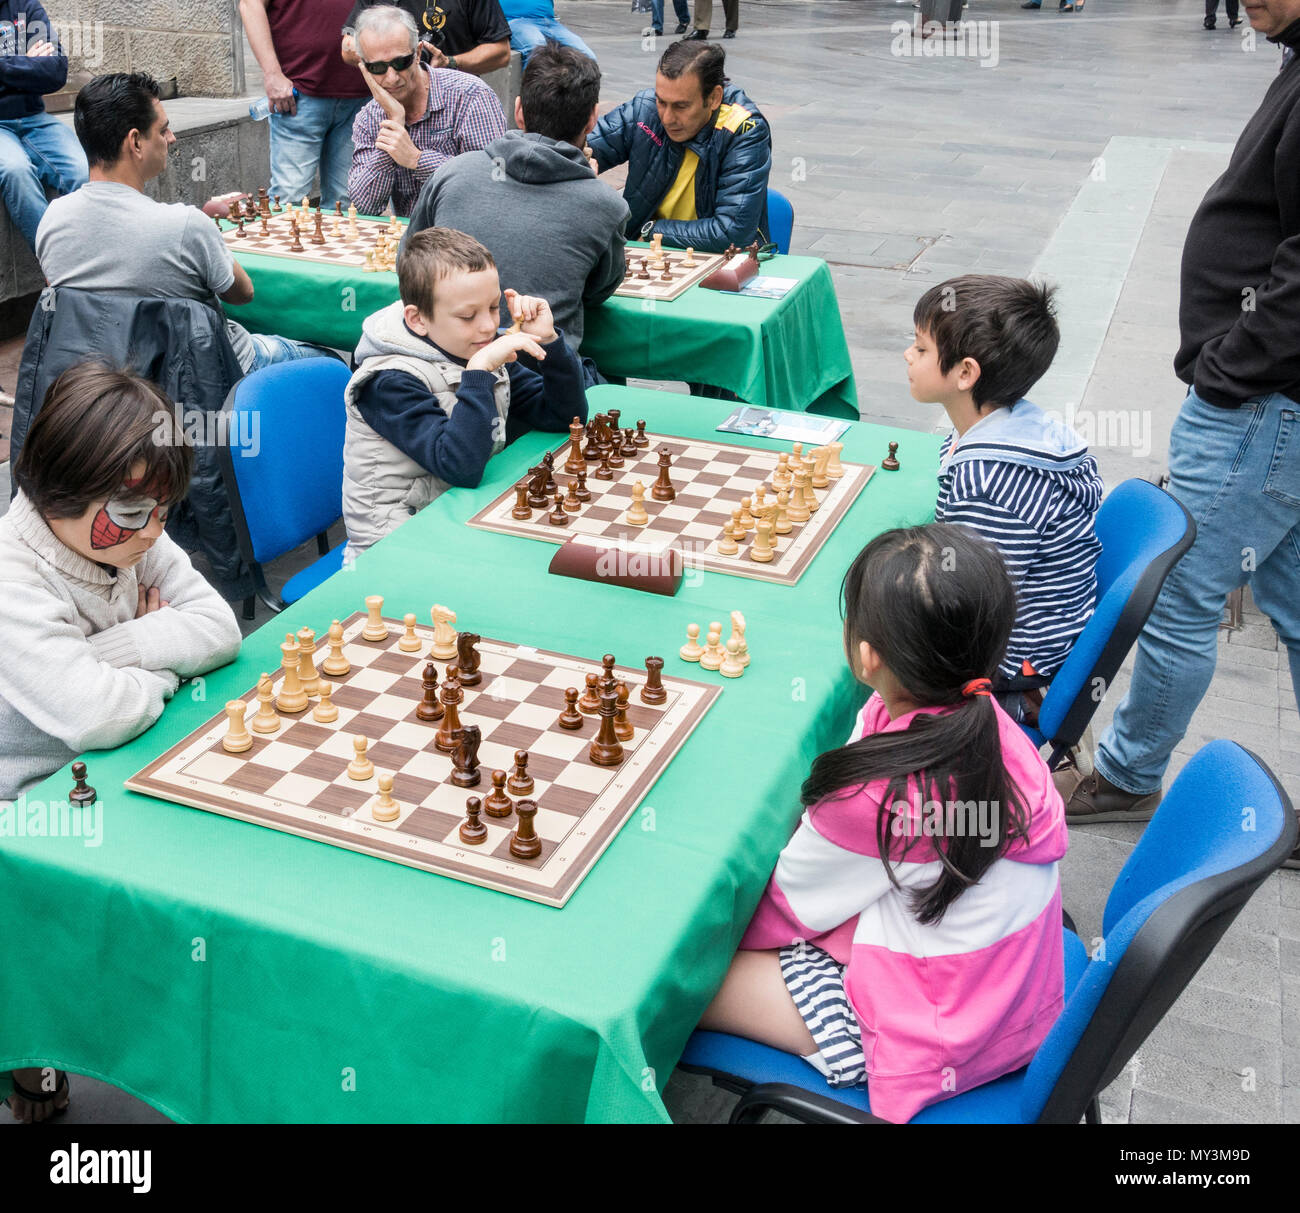 Children playing chess outdoors in Spain Stock Photo - Alamy